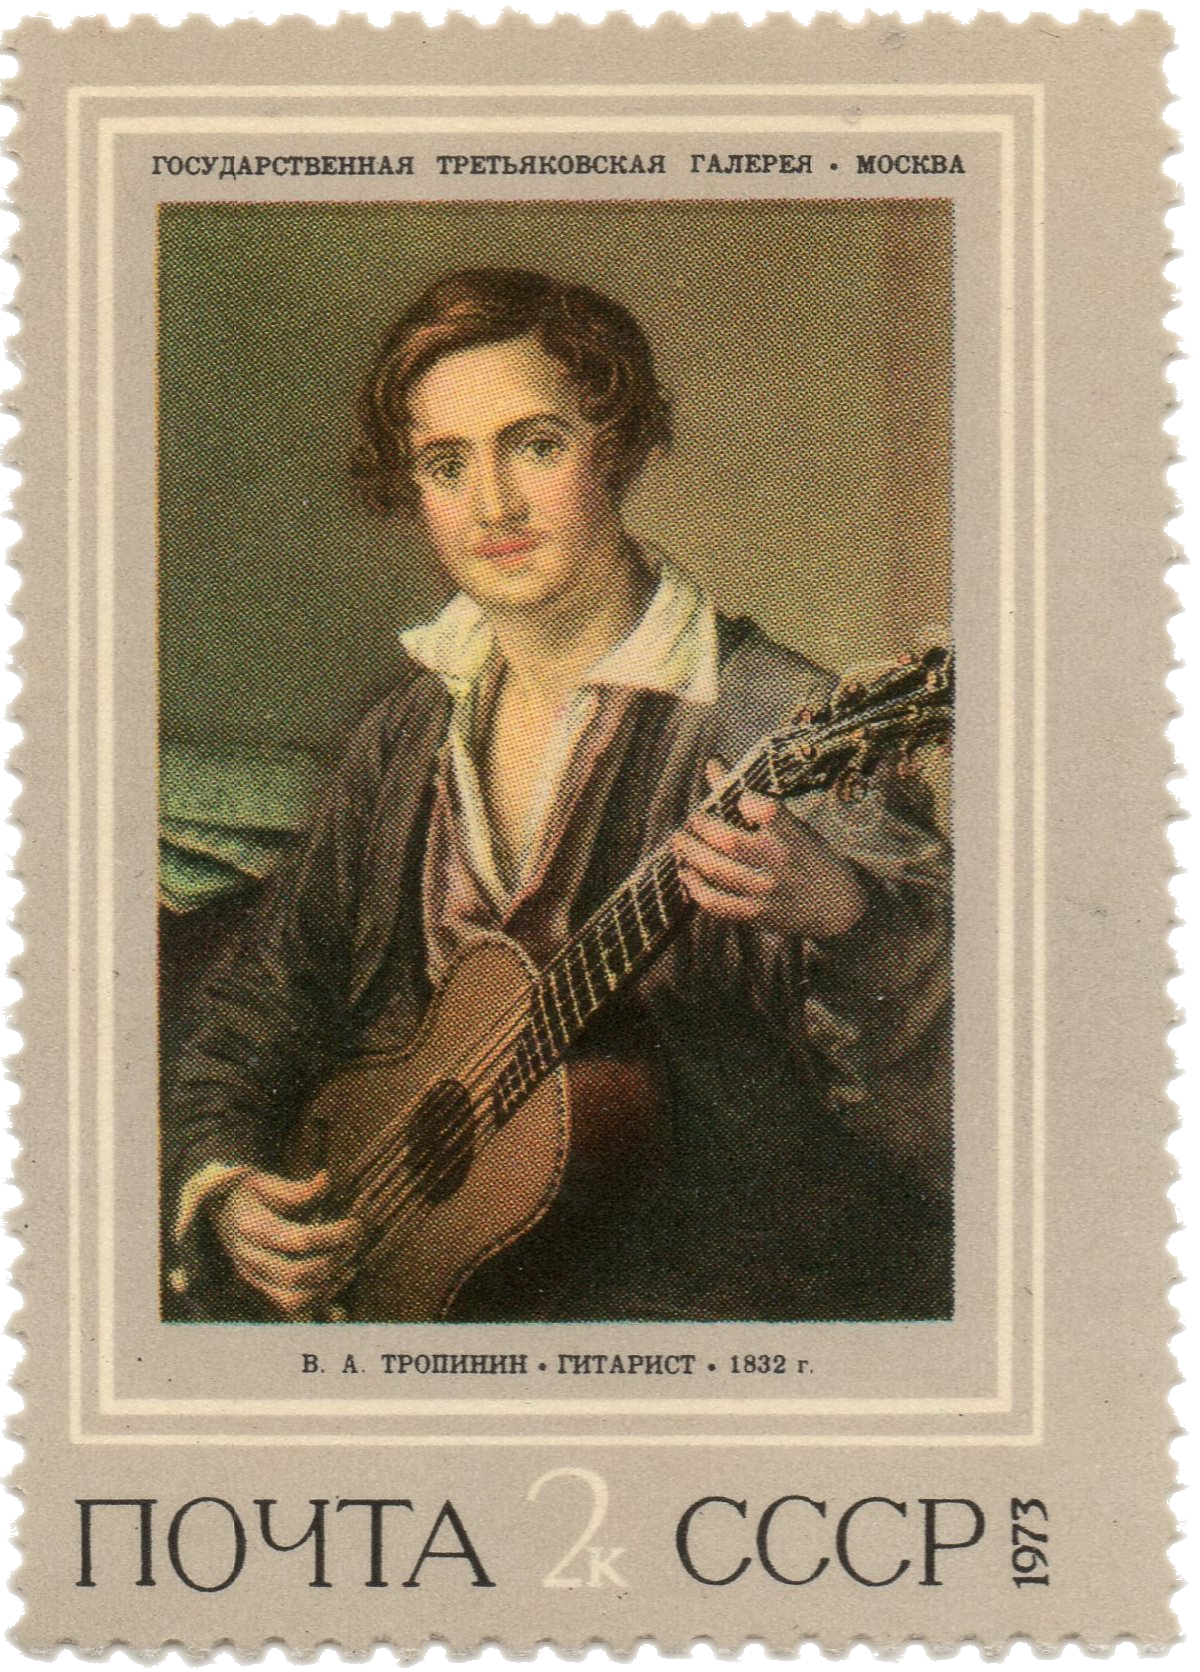 nft #1 Guitar player Vasily Andreevich Tropinin 1832 y. The State Tretyakov Gallery Moscow USSA 2 k. post 1973